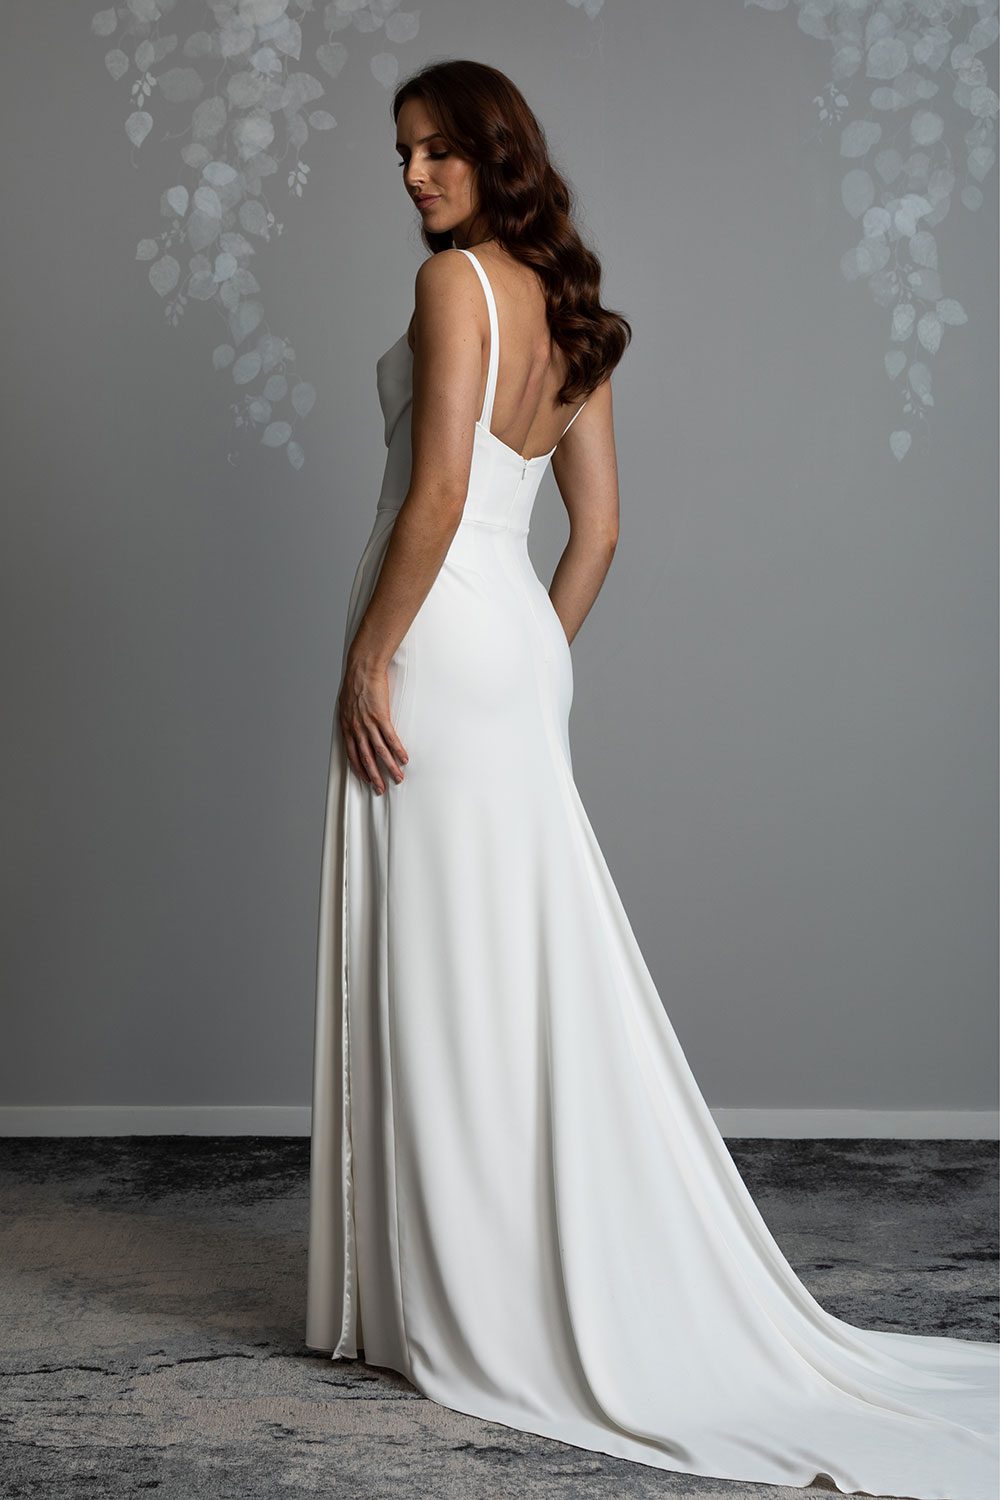 Evelyn Wedding Dress from Vinka Design. A divine gown made in a soft bridal crepe. It has a fitted bodice with soft draping over the bust line to flatter and enhance the figure. The straps compliment this detail by giving the bodice a softened square neckline. The skirt elegantly falls in folds from the side, revealing a flirtatious side split while in motion that falls closed again when still. Back view of long bridal crepe train and flattering square back design